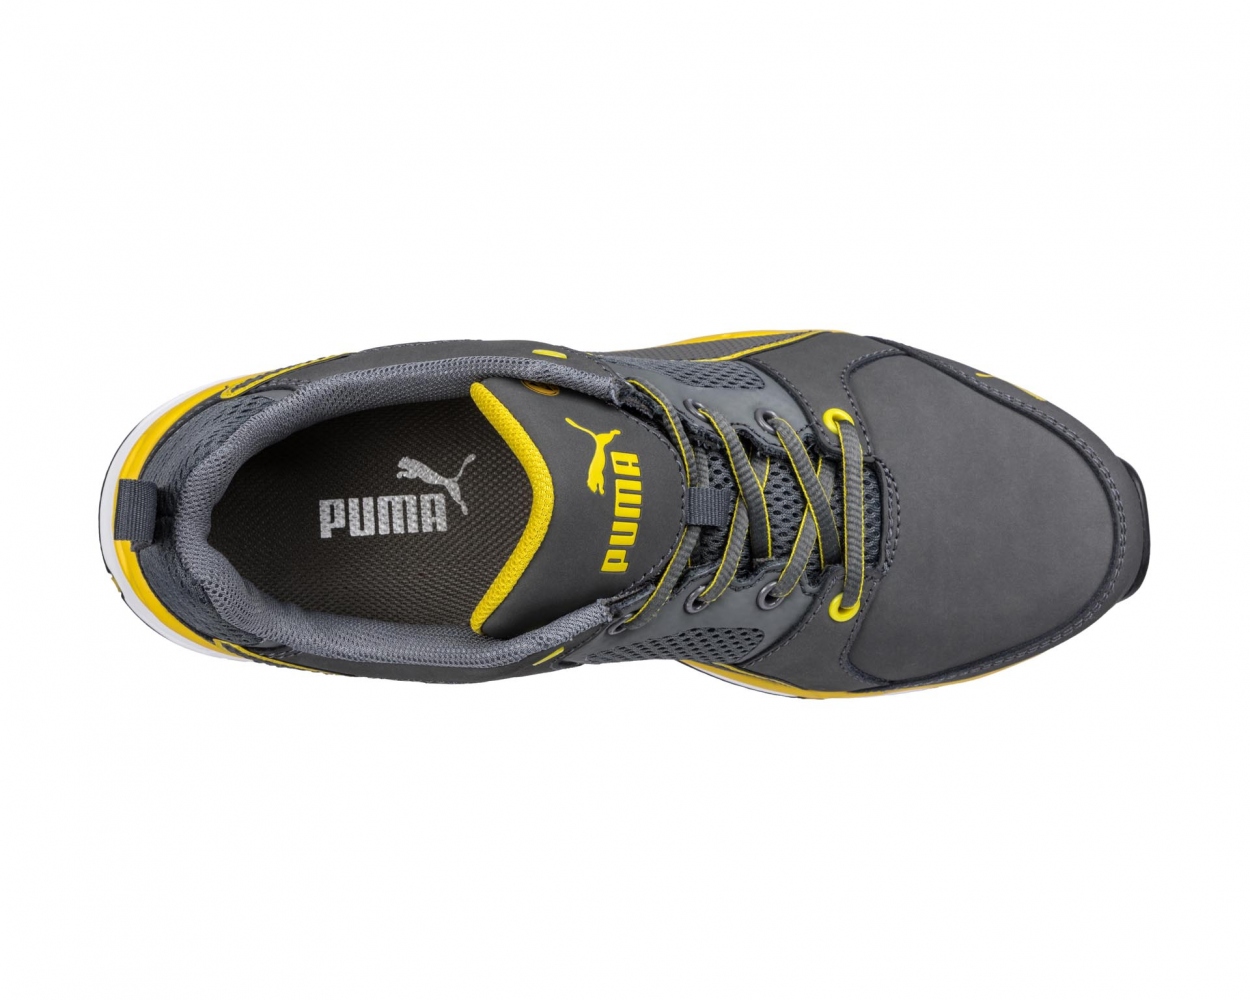 pics/Albatros/Safety Shoes/643800/puma-643800-pace-2-yellow-low-822-top.jpg